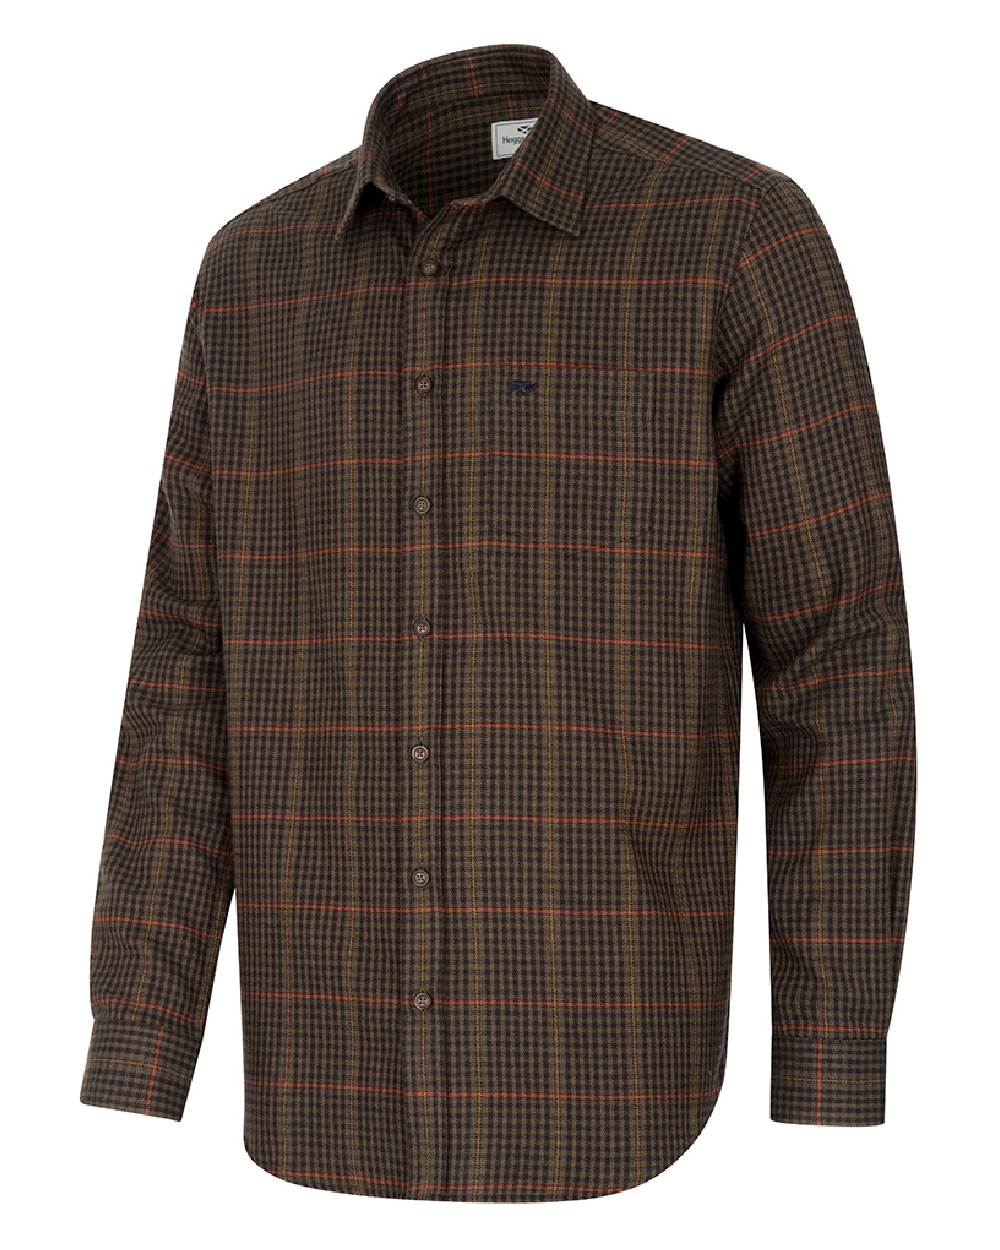 Green coloured Hoggs of Fife Harris Cotton Wool Twill Check Shirt on white background 